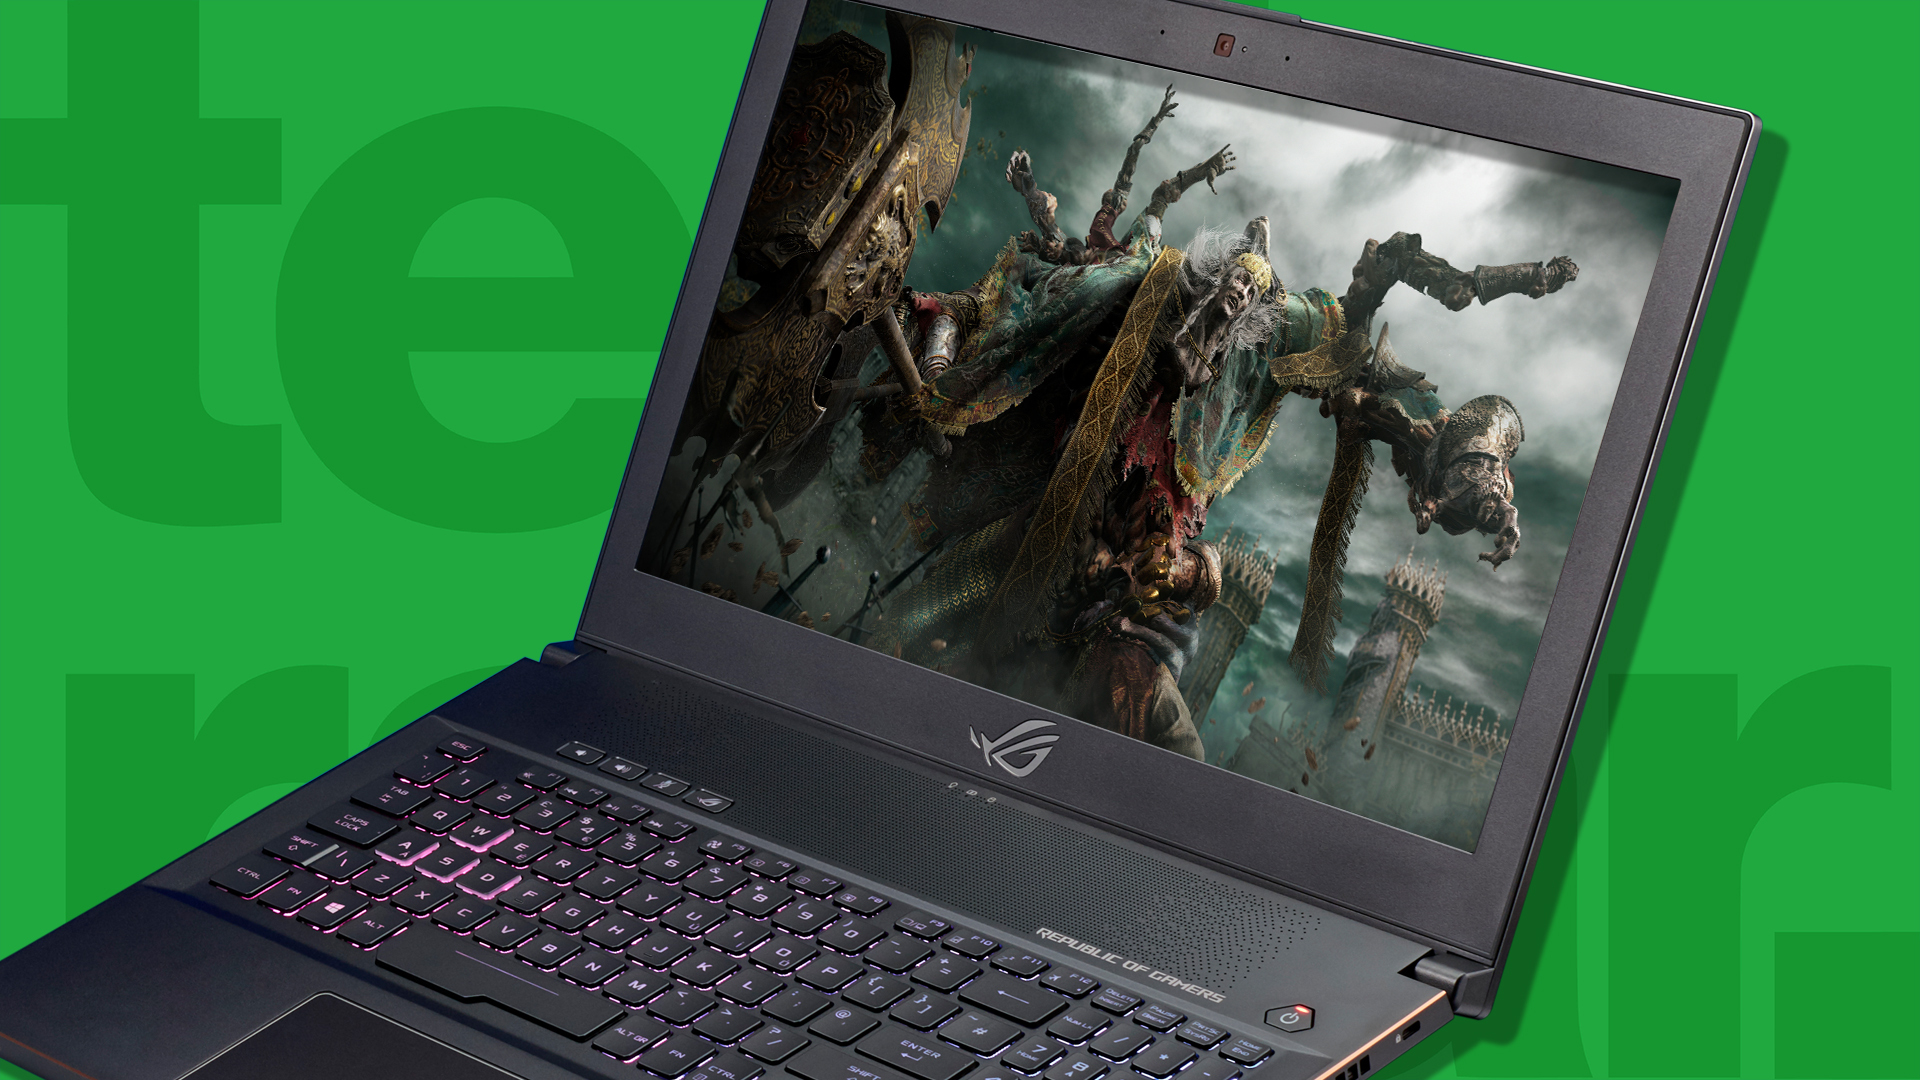 Elden Ring playing on an Asus ROG gaming laptop on a green background